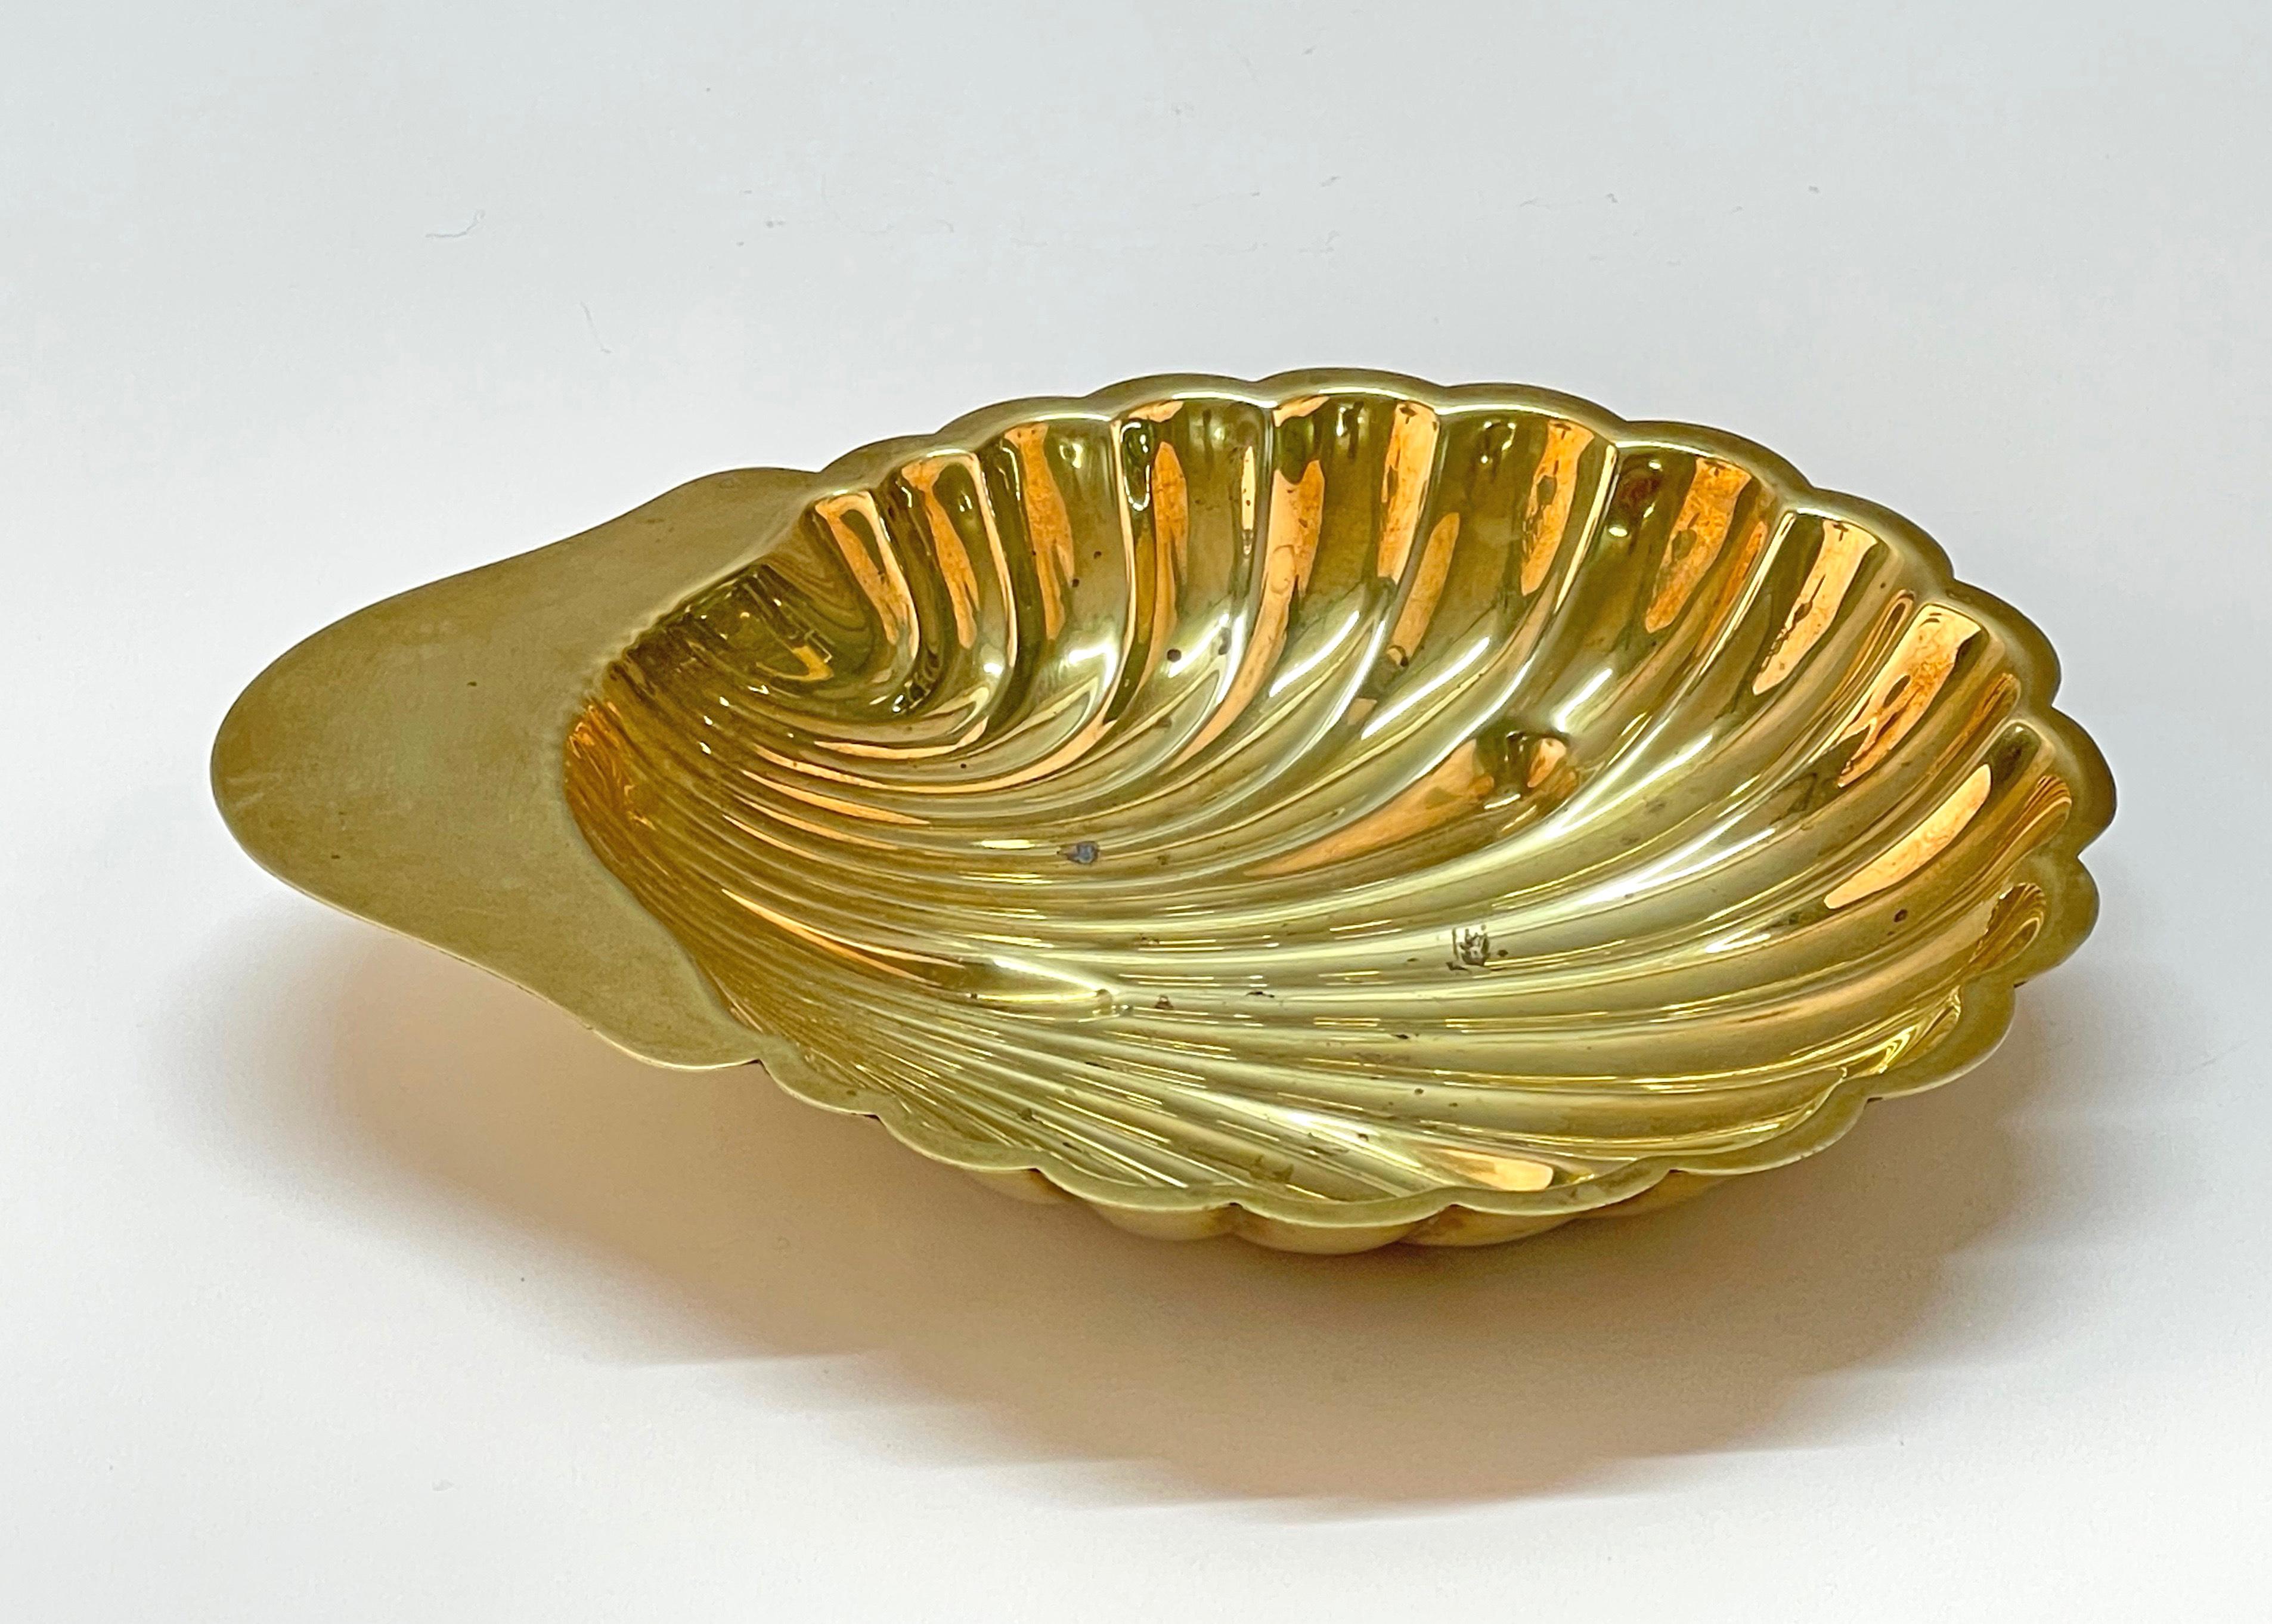 Mid-20th Century Mid-Century Italian Shell-Shaped Brass Bowl, by Renzo Cassetti 1960s For Sale